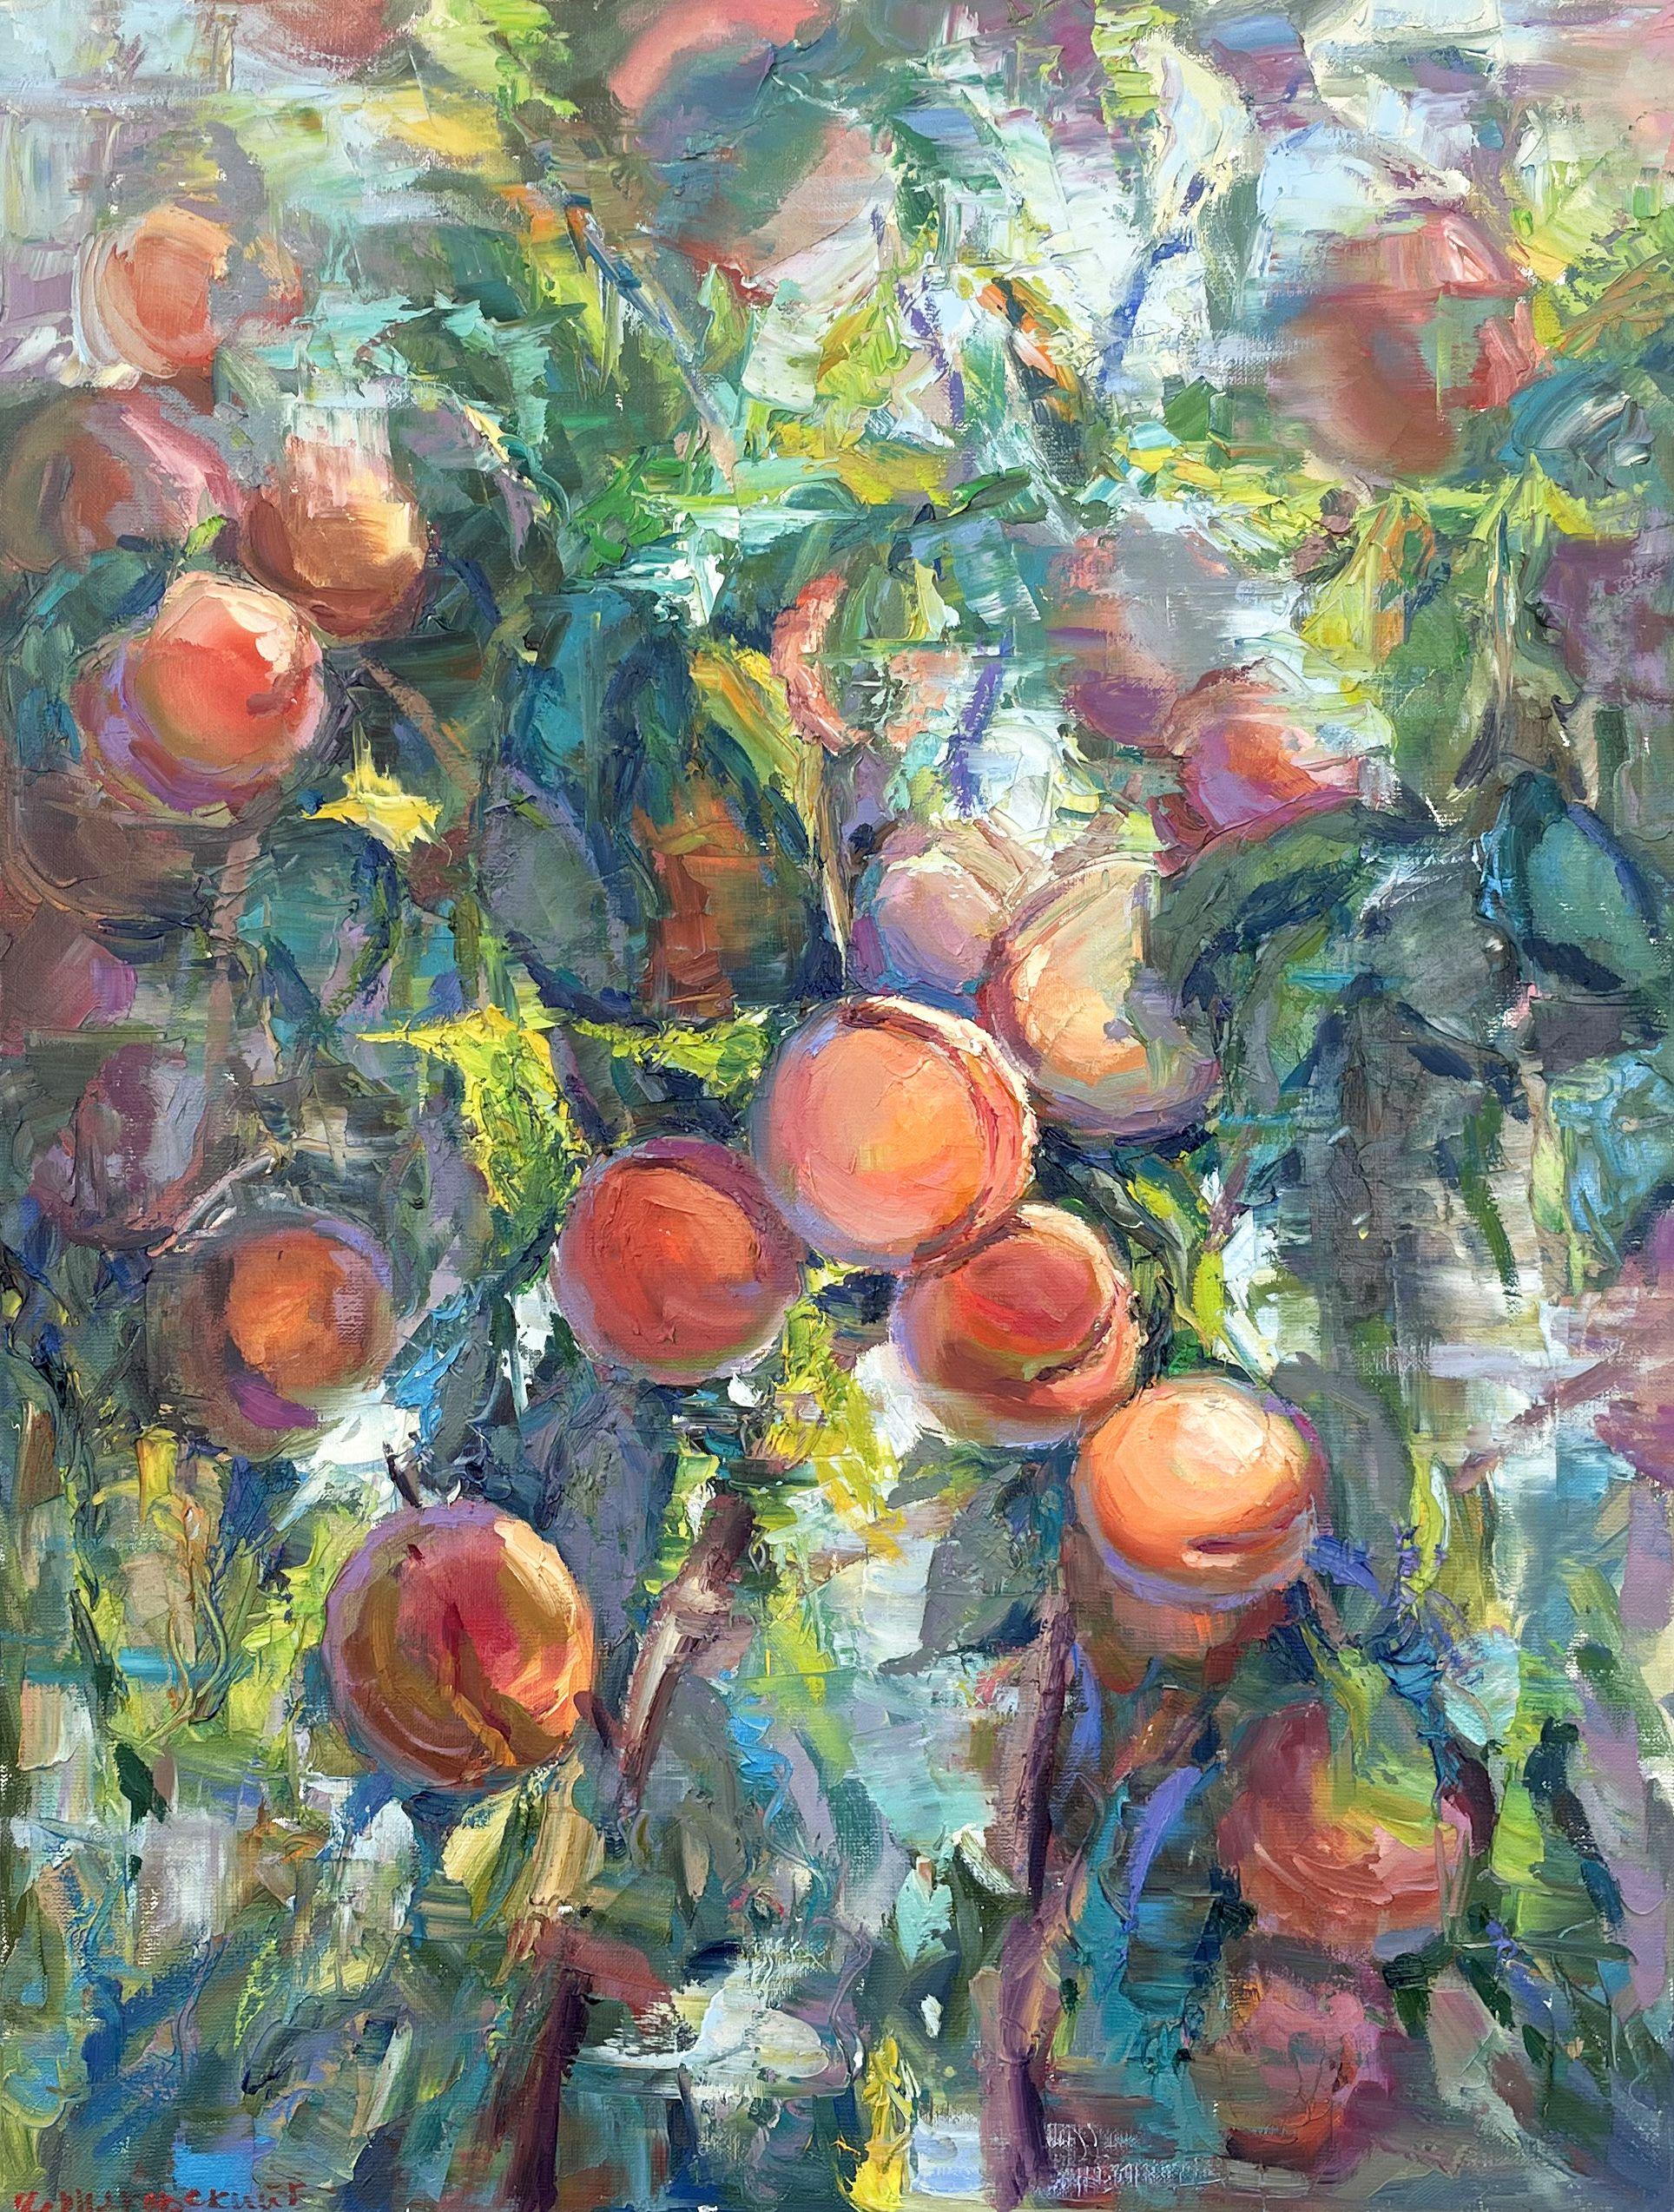 Original Oil painting by Ukrainian artist Evgeny Chernyakovsky      "Peaches"  80.0 X 60.0 CM / 31.4 X 23.6 IN  HIGH QUALITY oil on canvas  Signed on the front and back  Dated 2023  Good condition  GUARANTEE OF AUTHENTICITY   :: Painting ::